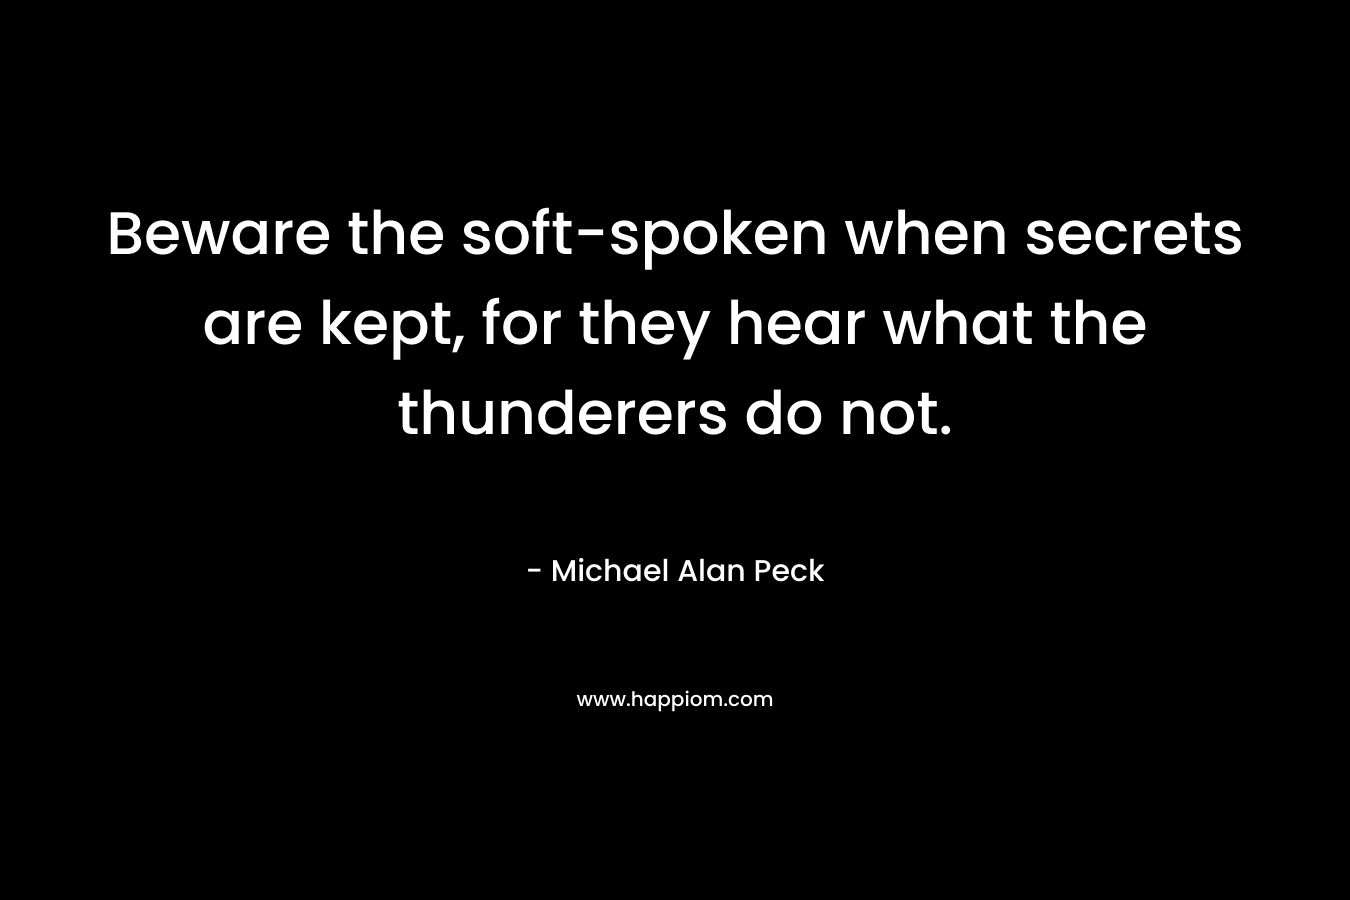 Beware the soft-spoken when secrets are kept, for they hear what the thunderers do not. – Michael Alan Peck